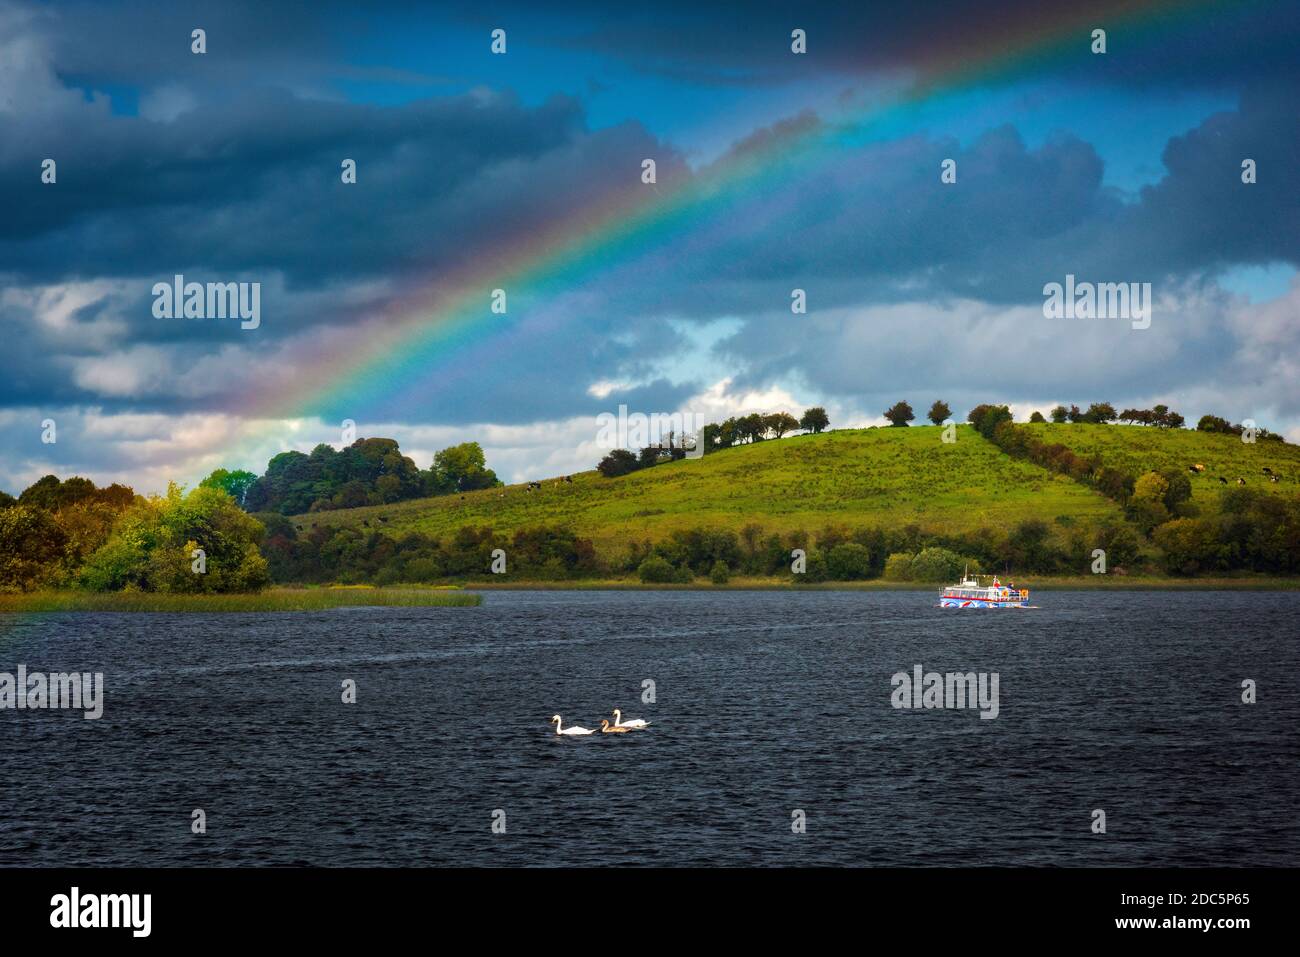 Lower Lough Erne mit Rainbow, Co. Fermanagh, Nordirland Stockfoto